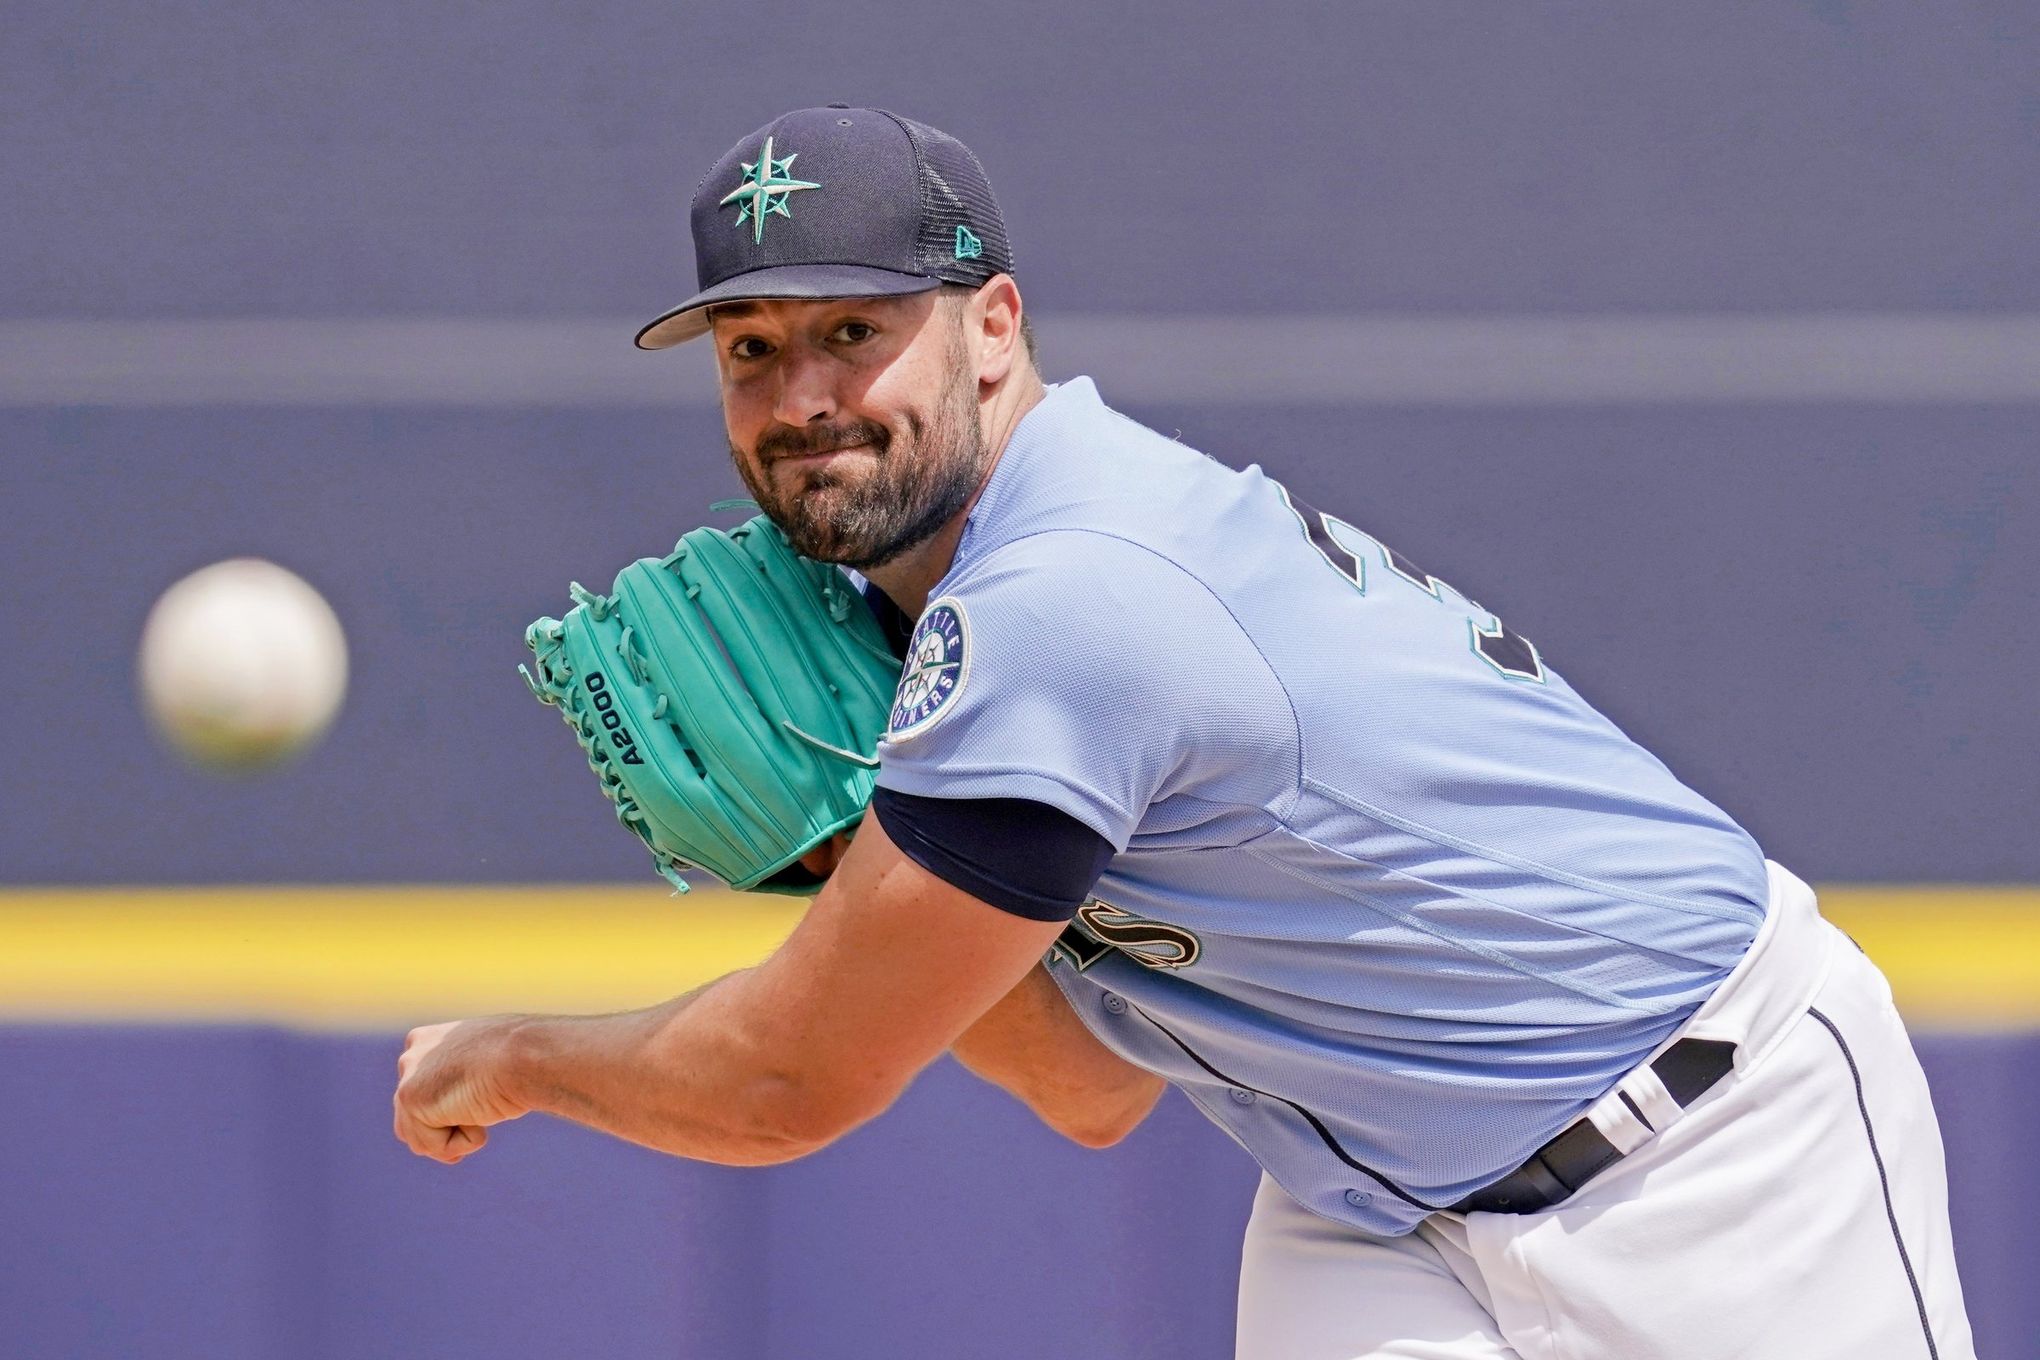 Robbie Ray is throwing gas again, and he has Mariners camp buzzing